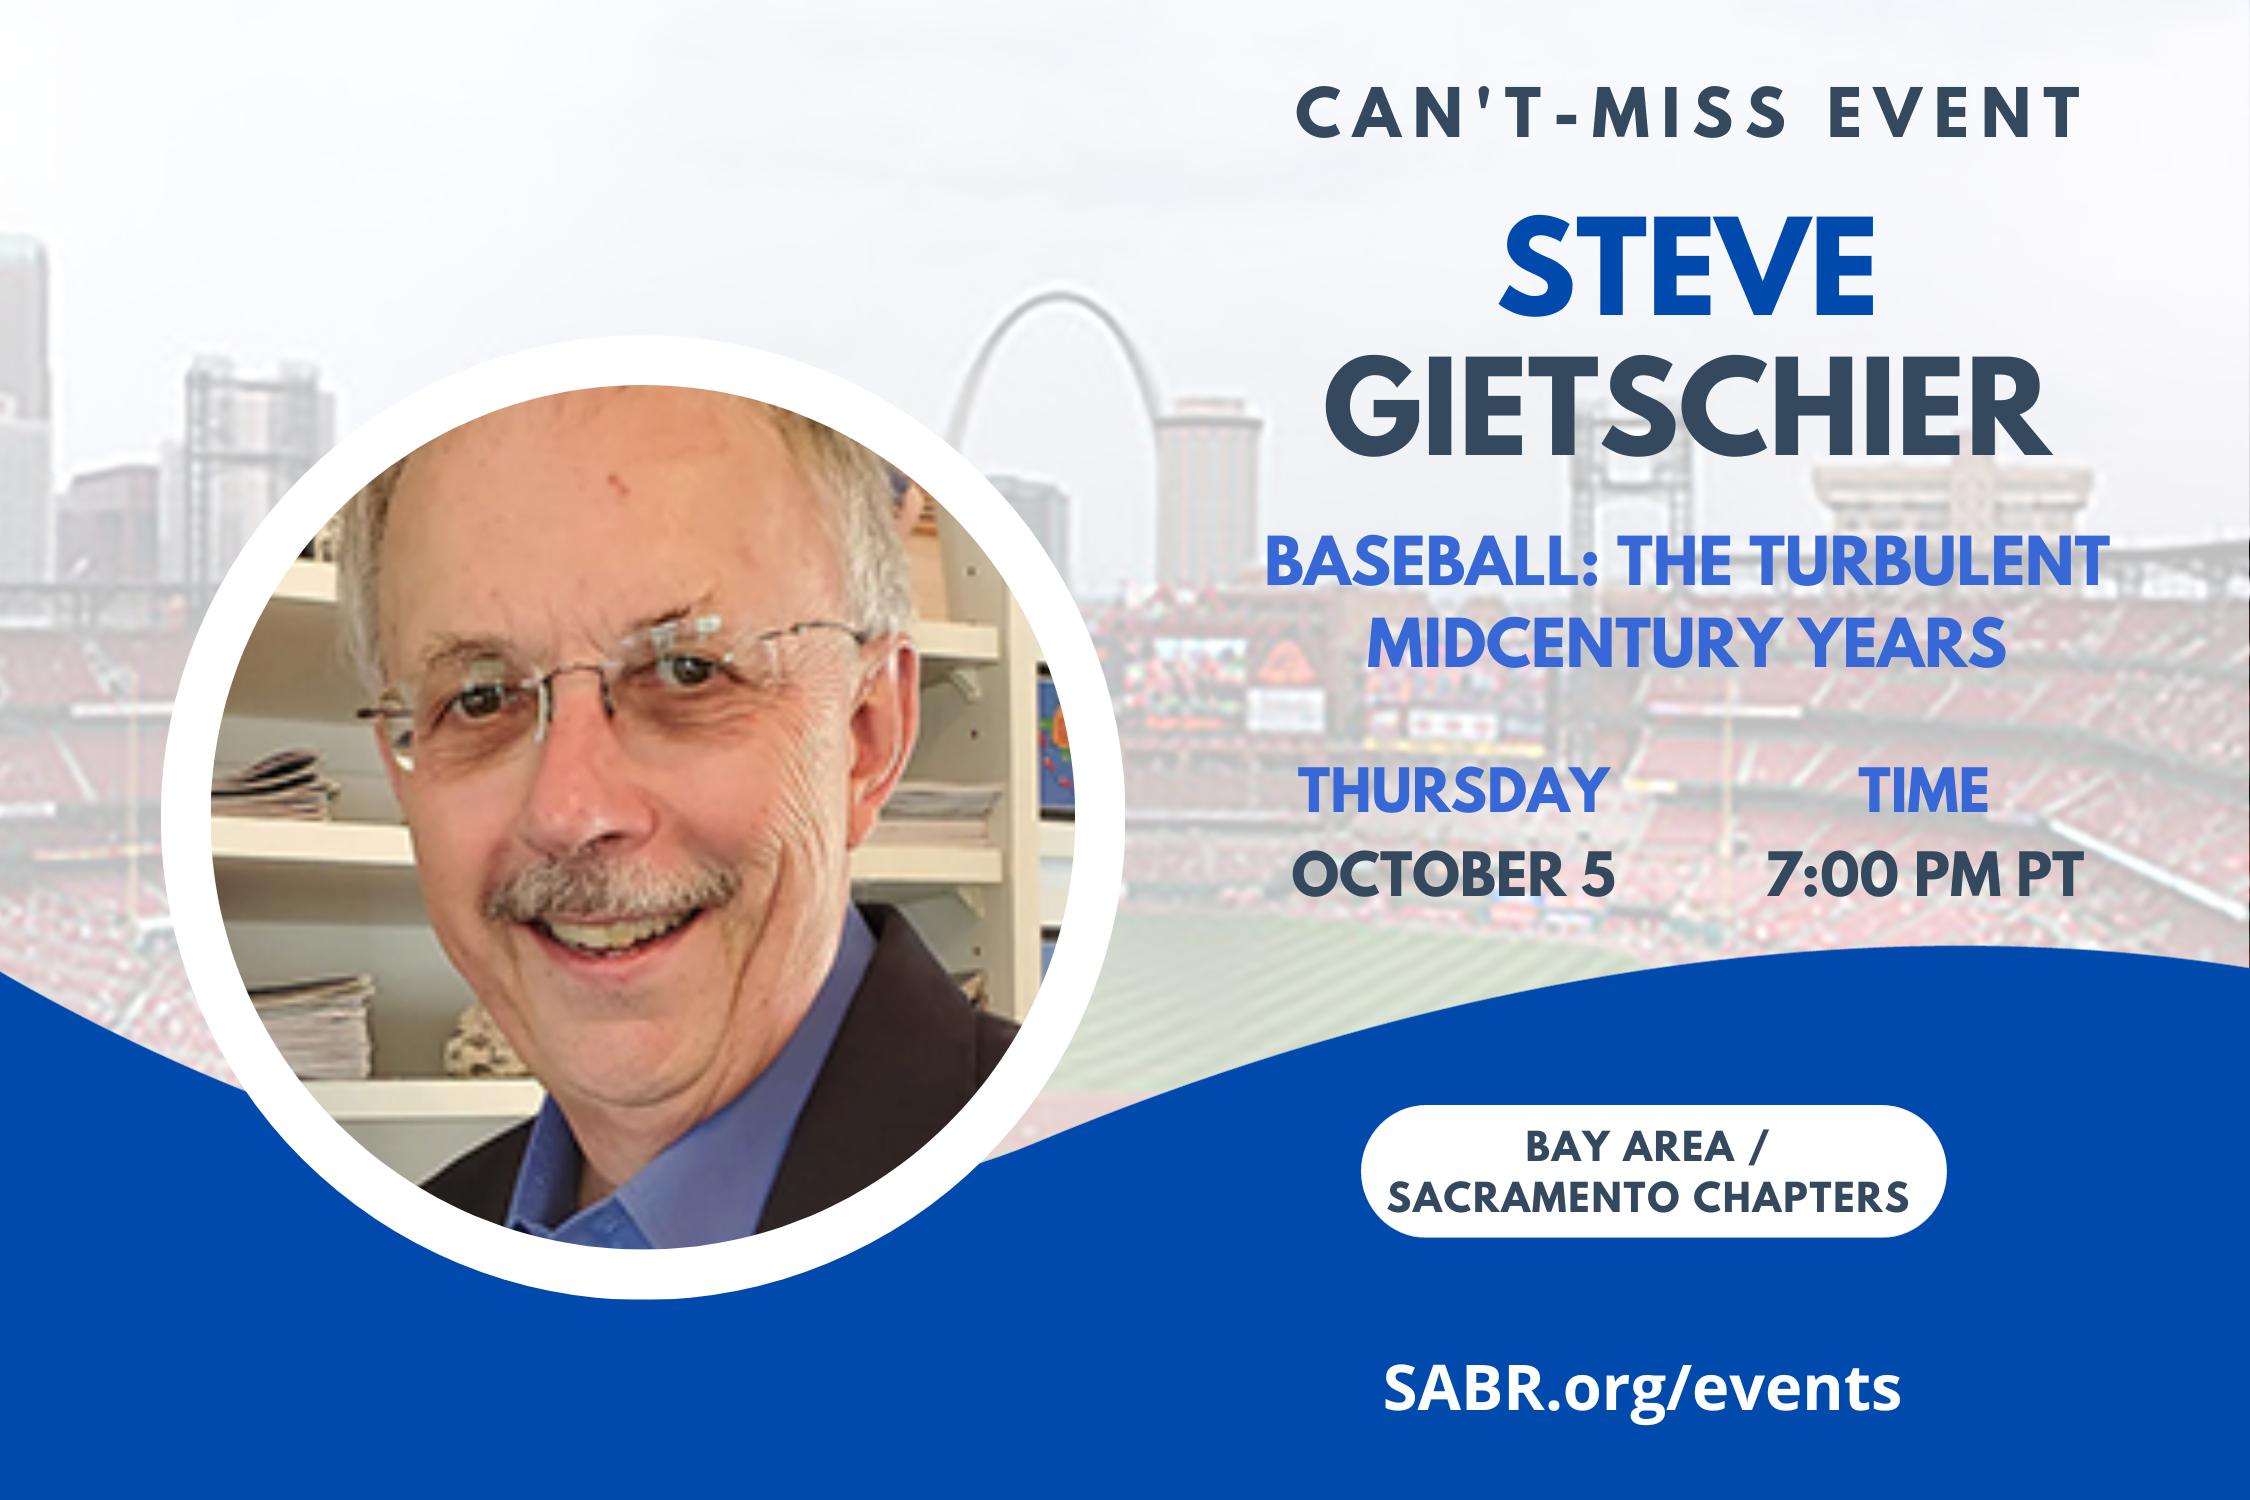 The Dusty Baker-Sacramento and Lefty O’Doul-Bay Area SABR chapters are excited to hold a special meeting on Thursday, October 5, at 7 p.m. PDT! All baseball fans are invited to attend. Author Steve Gietschier will discuss "Baseball: The Turbulent Midcentury Years."